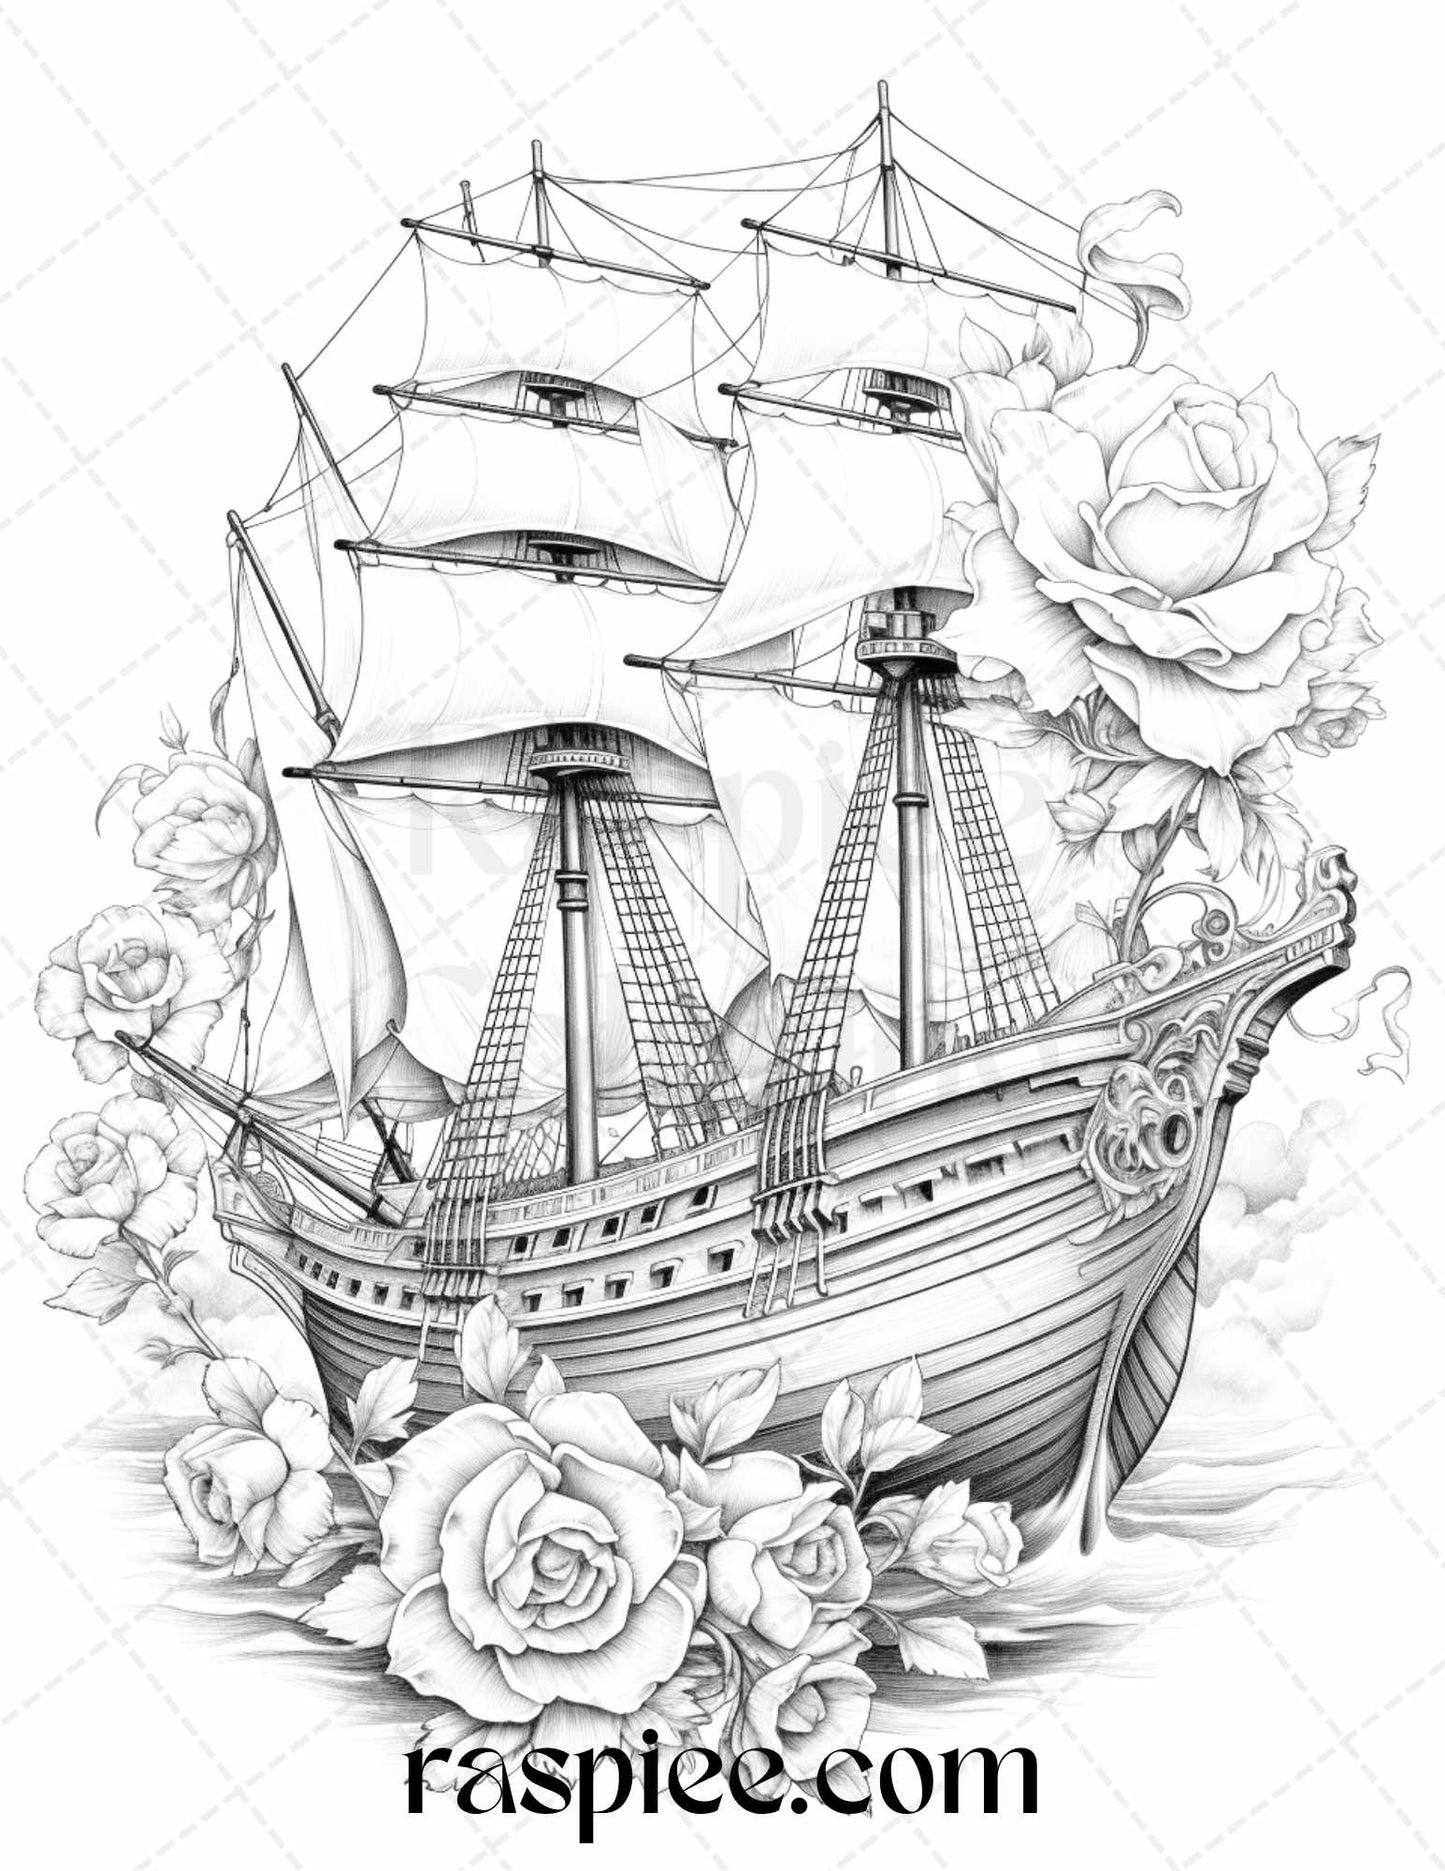 44 Flower Ships Graysale Coloring Pages Printable for Adults, PDF File Instant Download - Raspiee Coloring